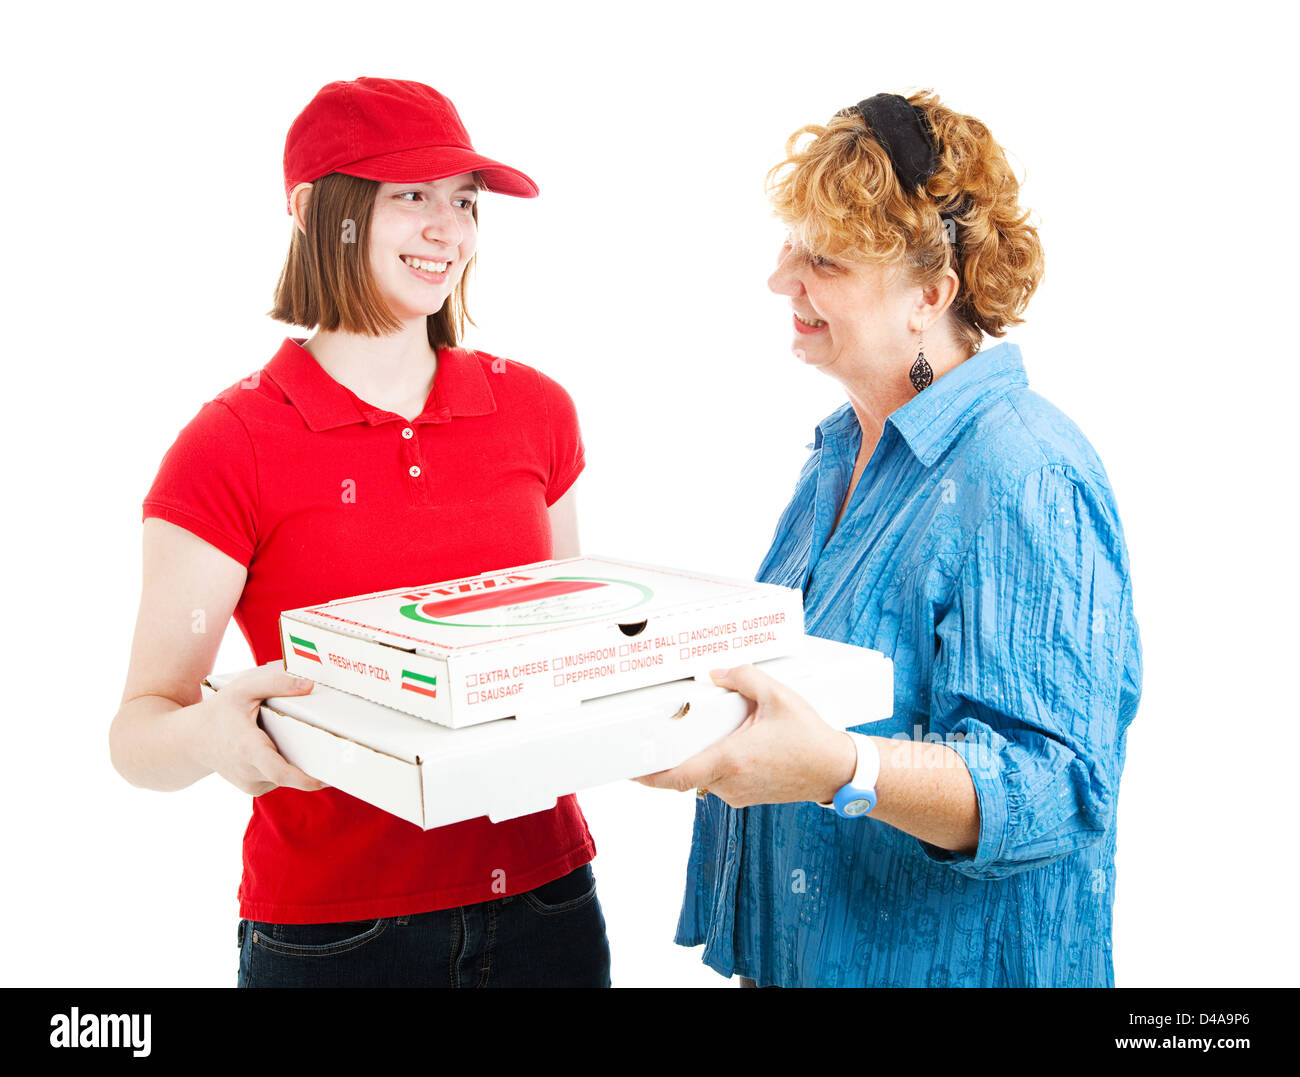 Customer receives extra service from pizza delivery girl